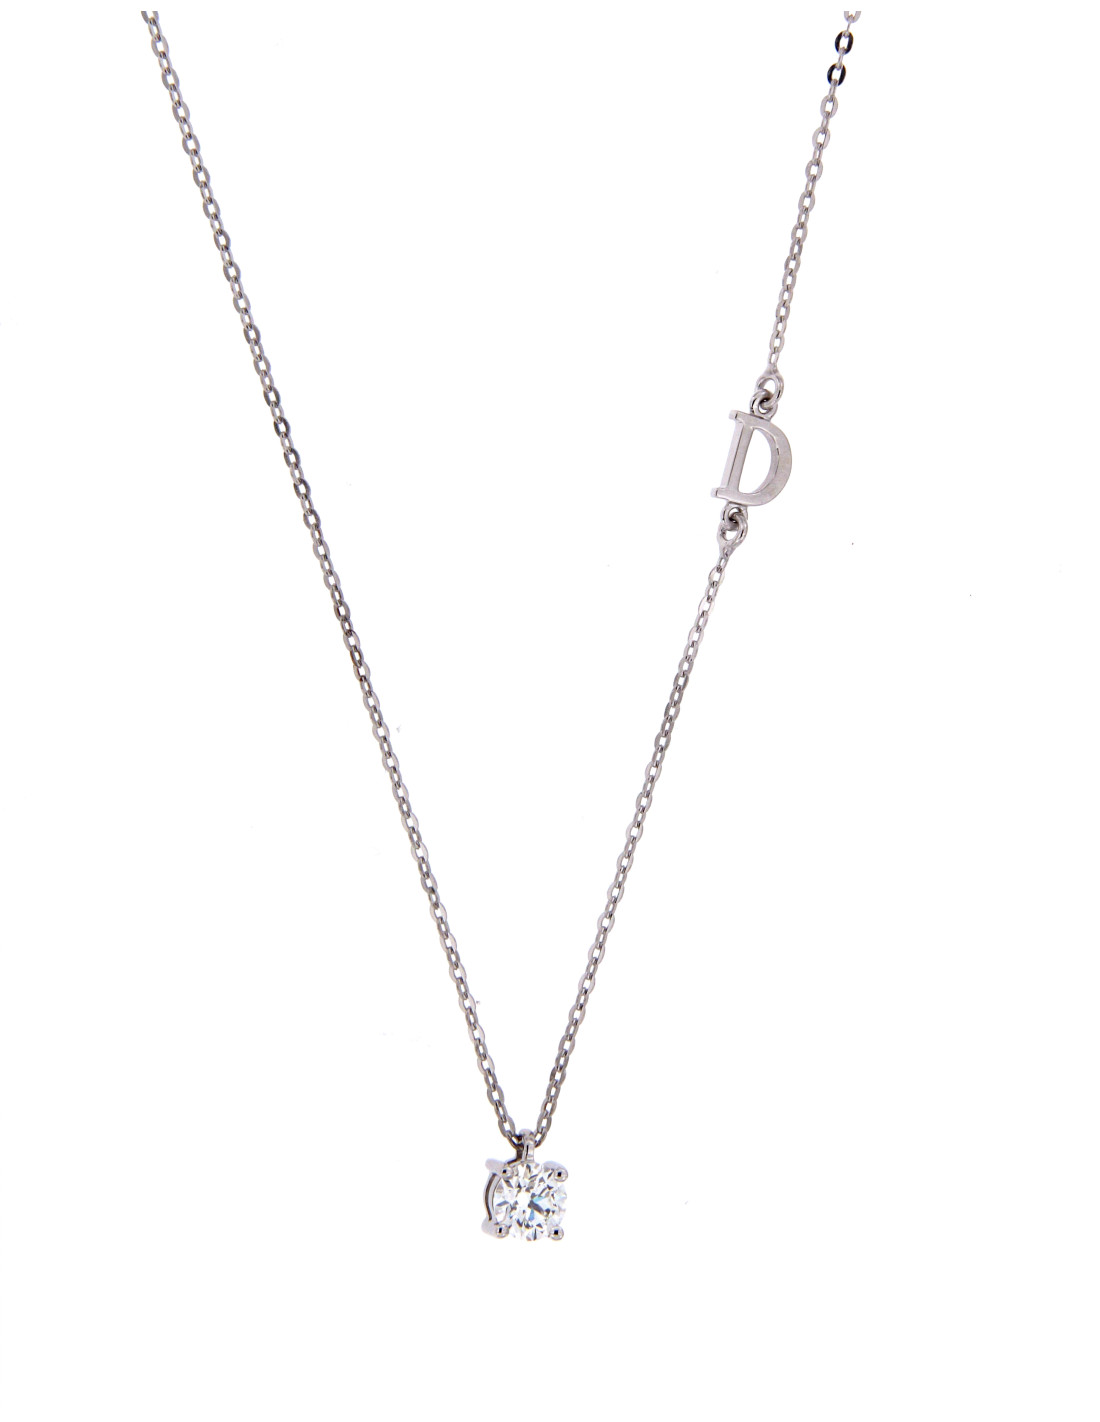 DAMIANI LUCE WHITE GOLD AND DIAMOND NECKLACE 0.30 ct - 20055863